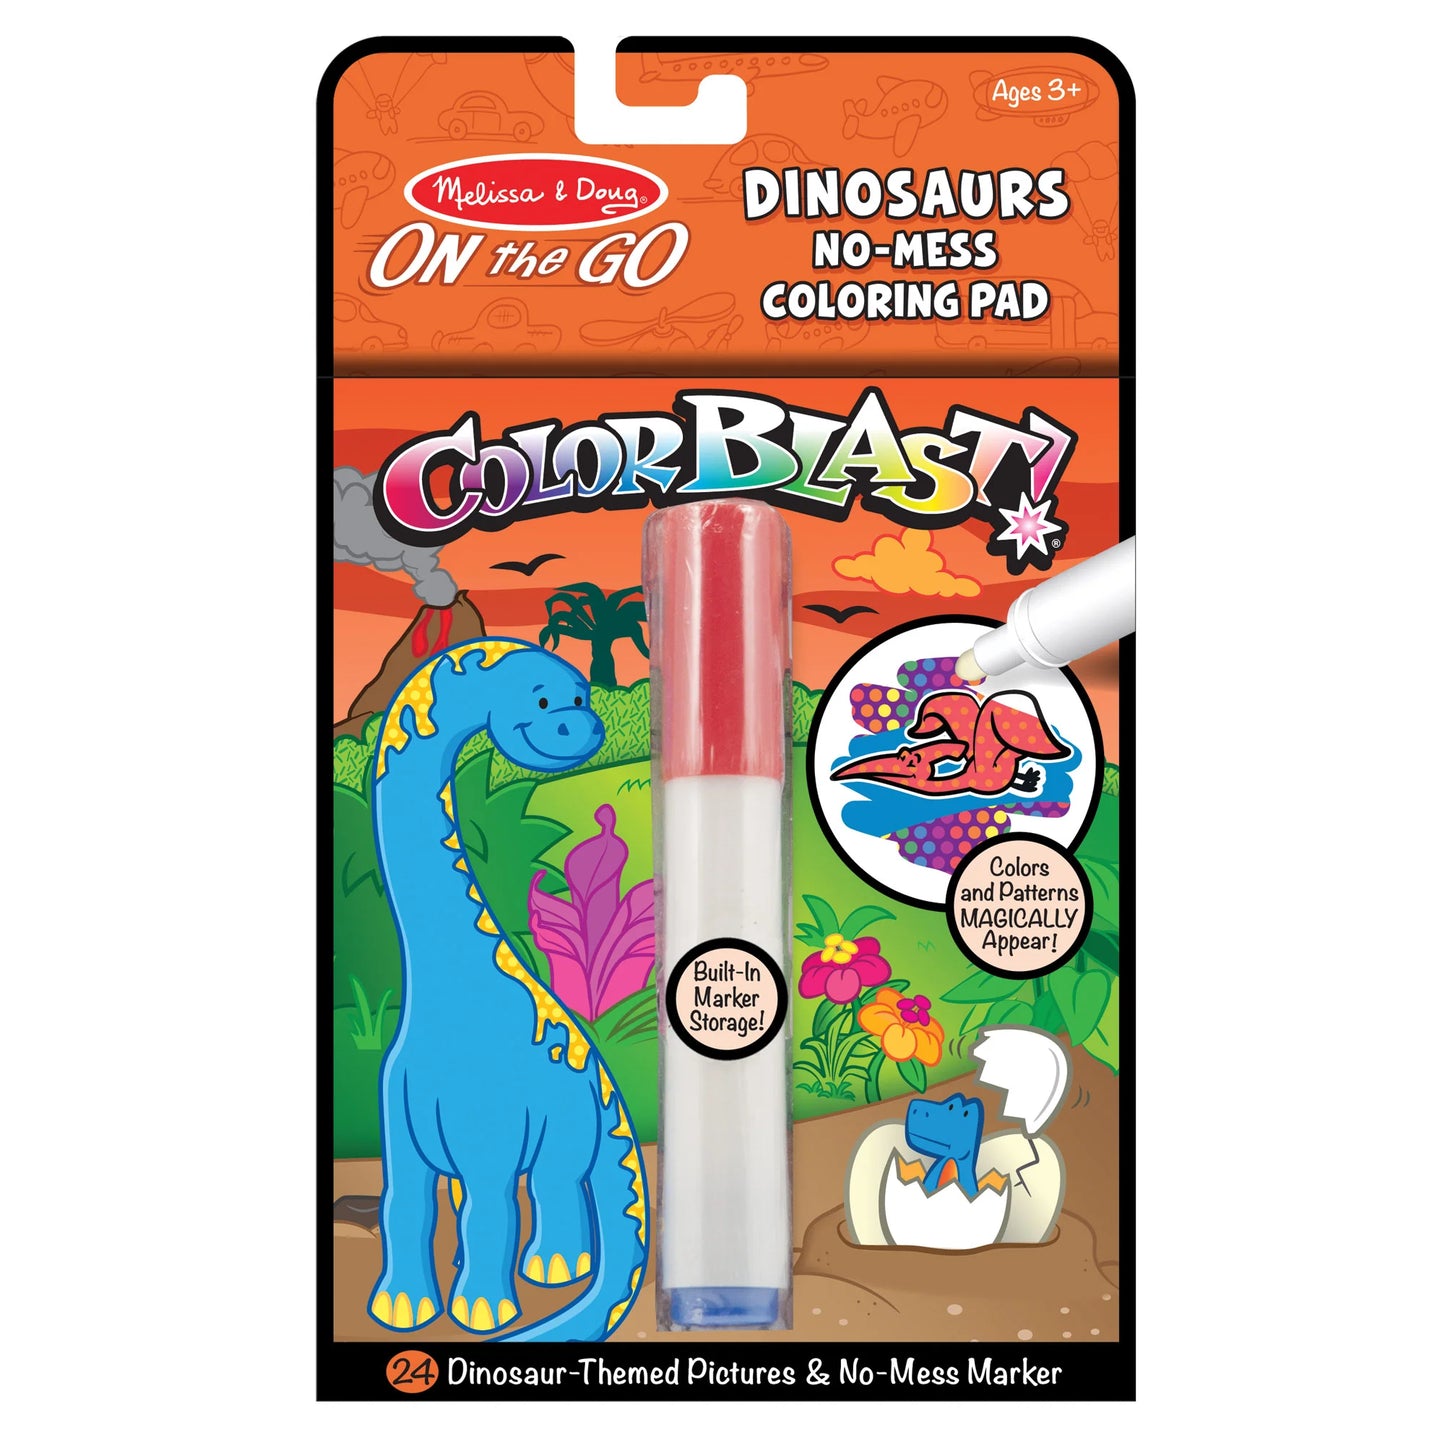 On the Go Activity Colorblast Book - Dinosaurs